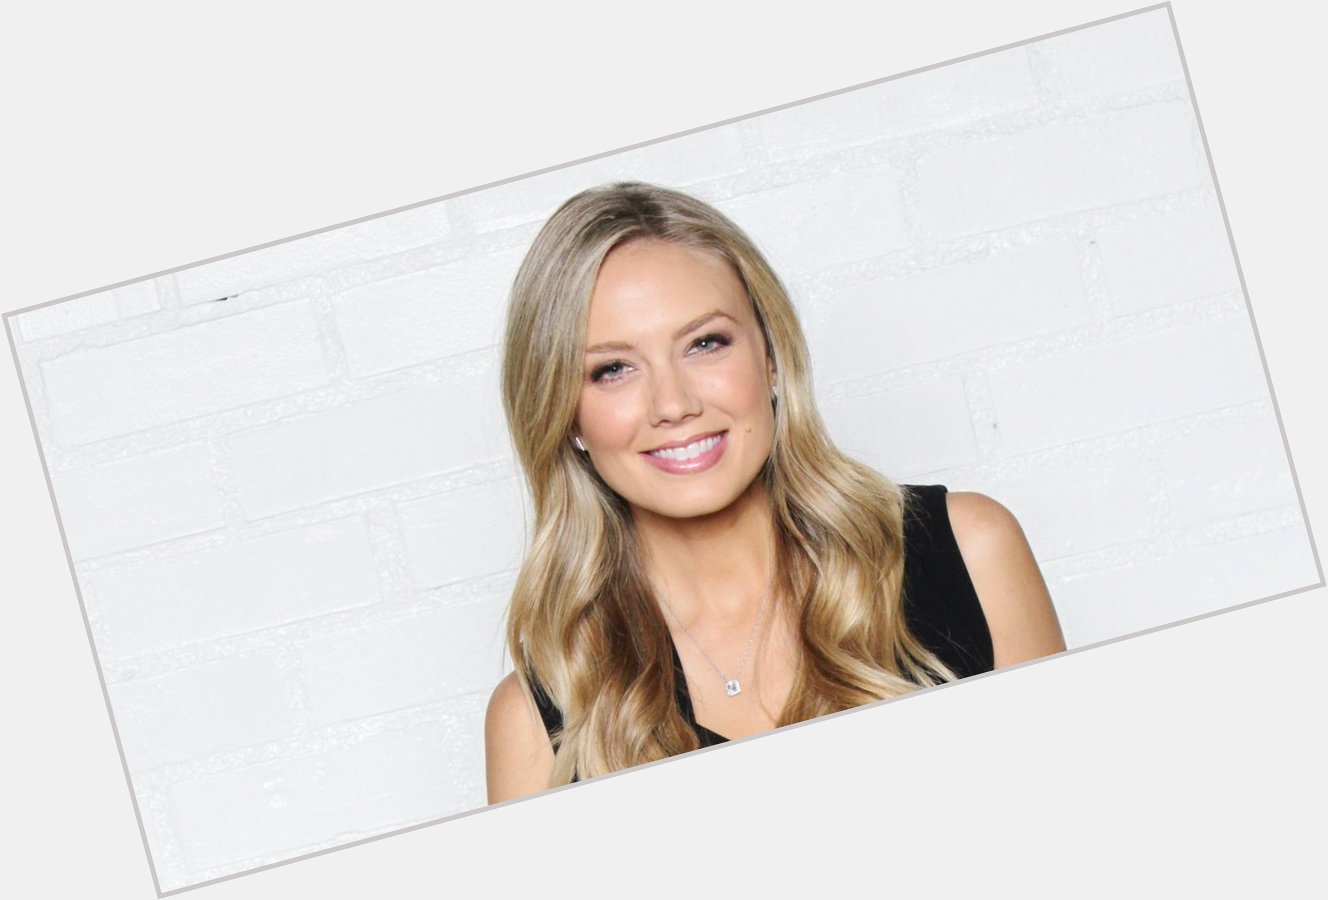 Wishing a very happy birthday to Melissa Ordway!!                 